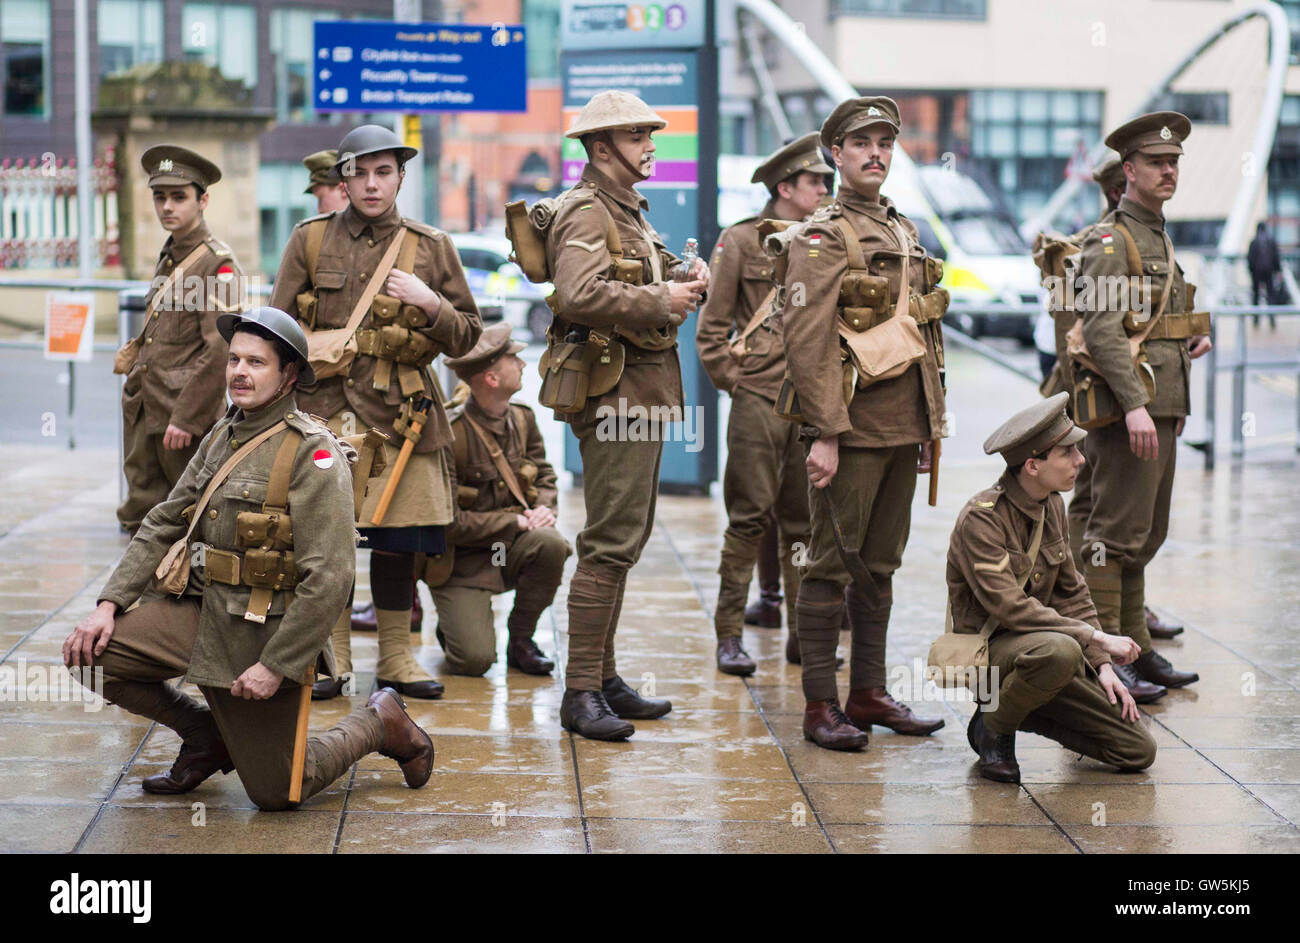 Manchester marks the 100th anniversary of the Battle of the Somme today (Fri 1st July 2016) with a moving tribute. Stock Photo